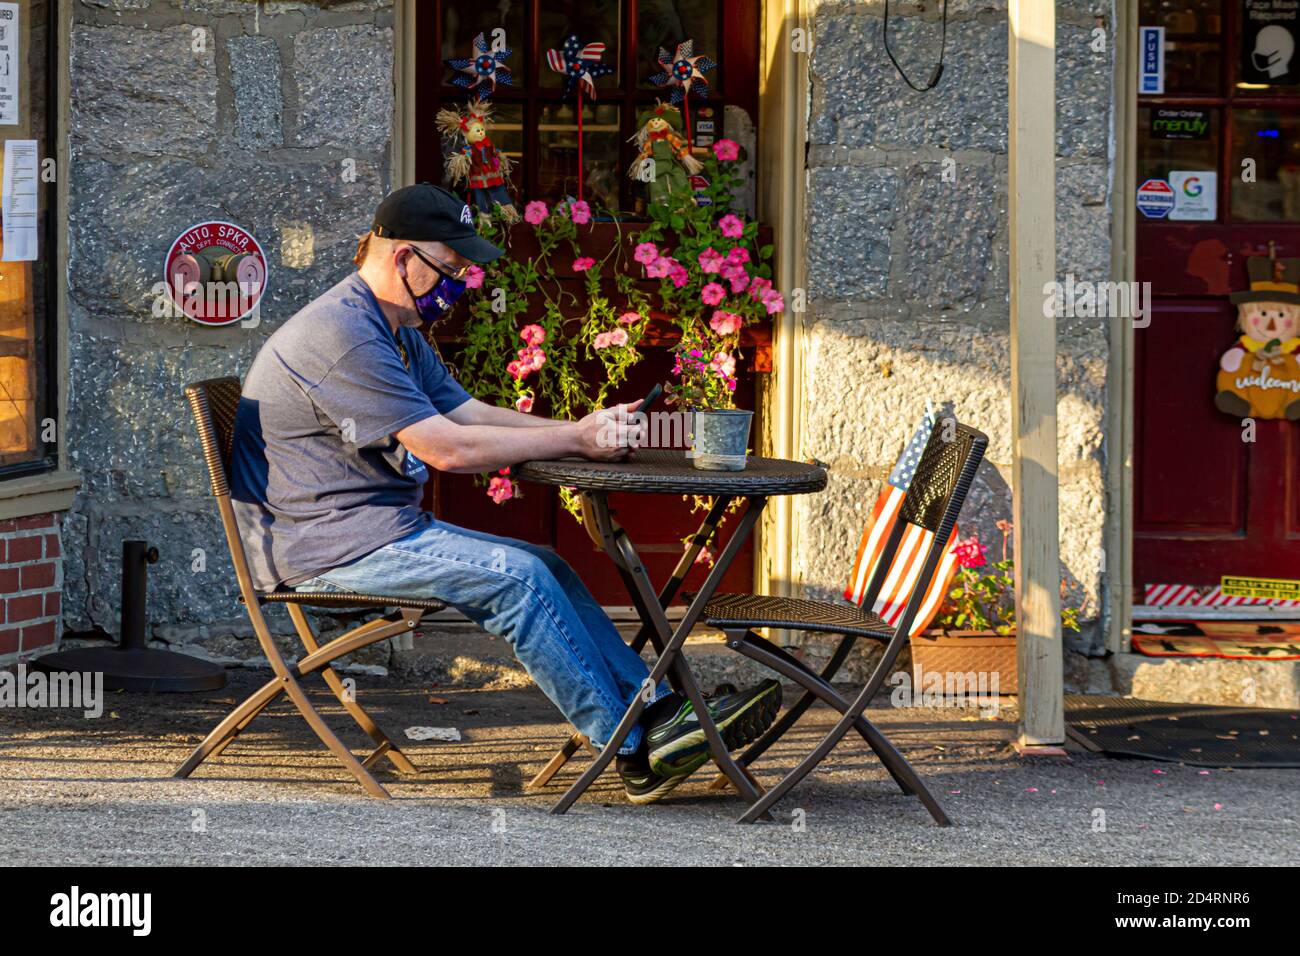 Ellicott City, MD, USA 10/07/2020: Due to COVID-19 pandemic, customers at restaurants prefer sitting outside and with their masks on. A caucasian man Stock Photo